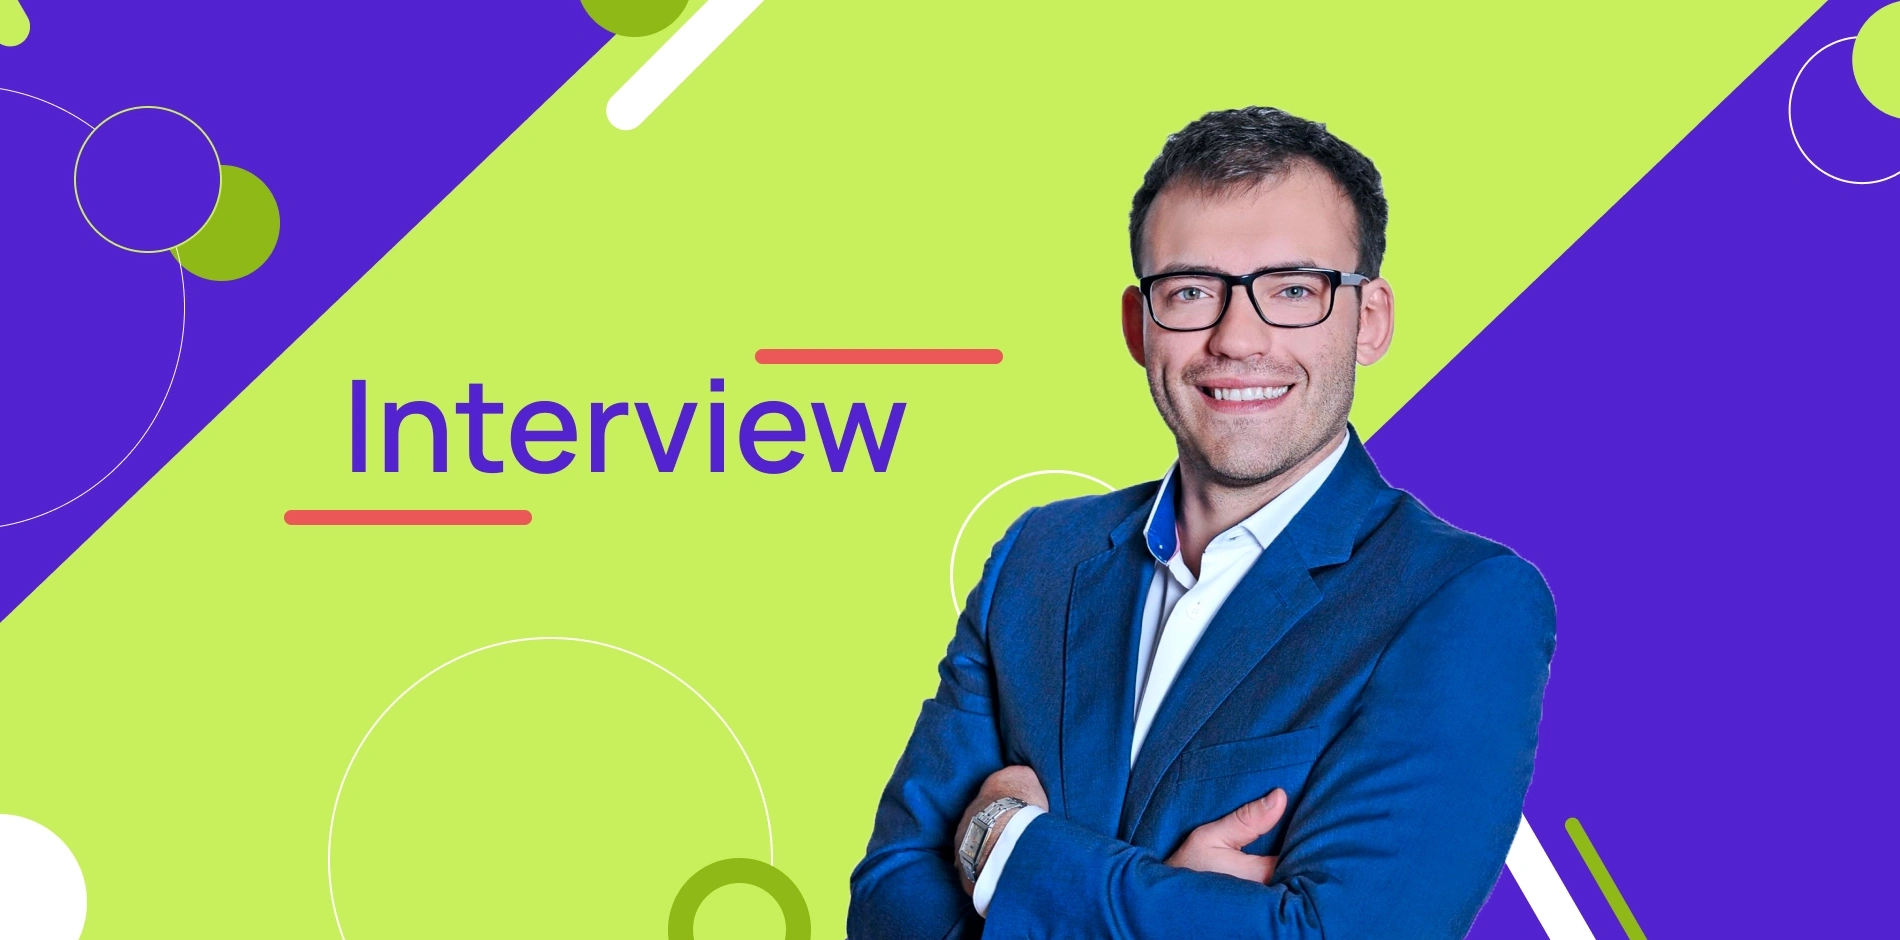 Men in suit and glasses on purple-green background with text "Interview"